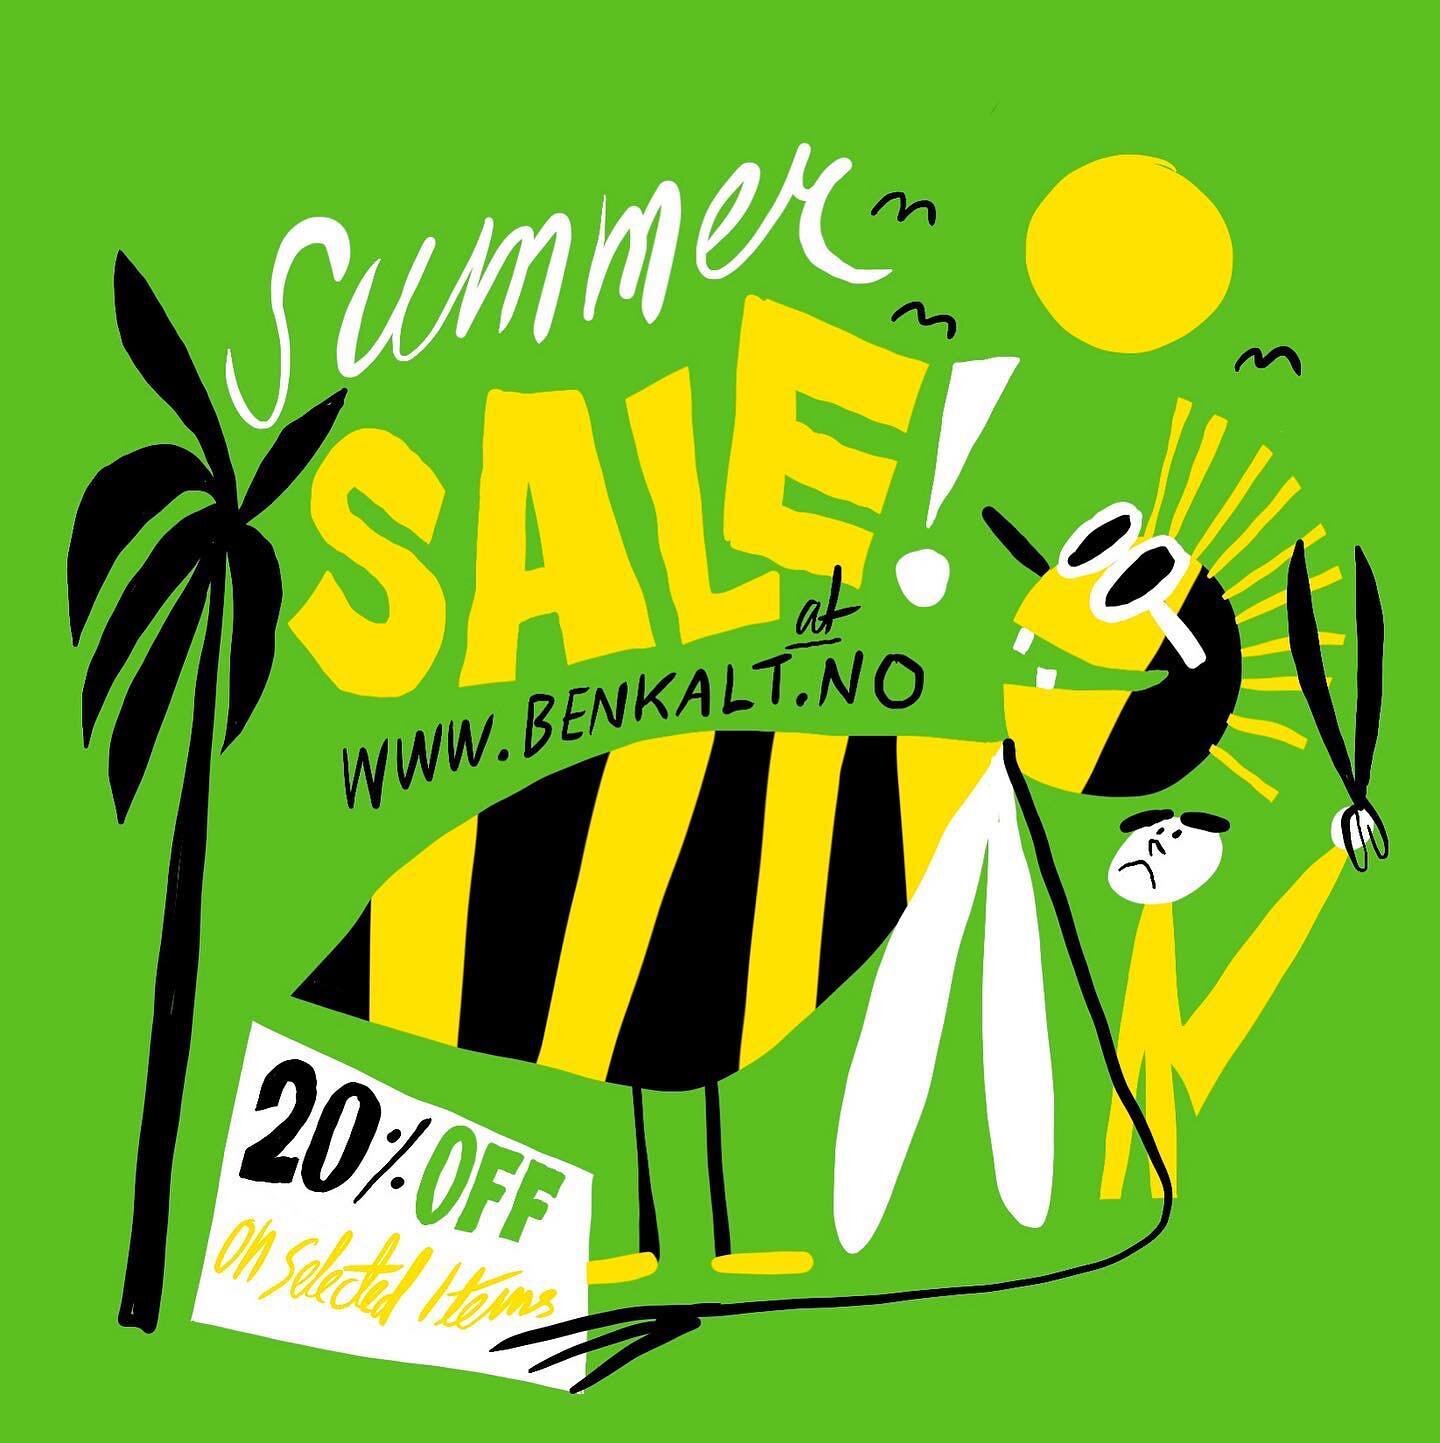 SUMMER SALE at my benkalt-store! 20% off on 20 items! Free shipping! Swipe to see a few, visit www.Benkalt.no to check out the rest! Swimsuits, shorts, bikinis, flip flips, bags and more for the summer. #summersale #sommersalg #clothing #bikini #shor